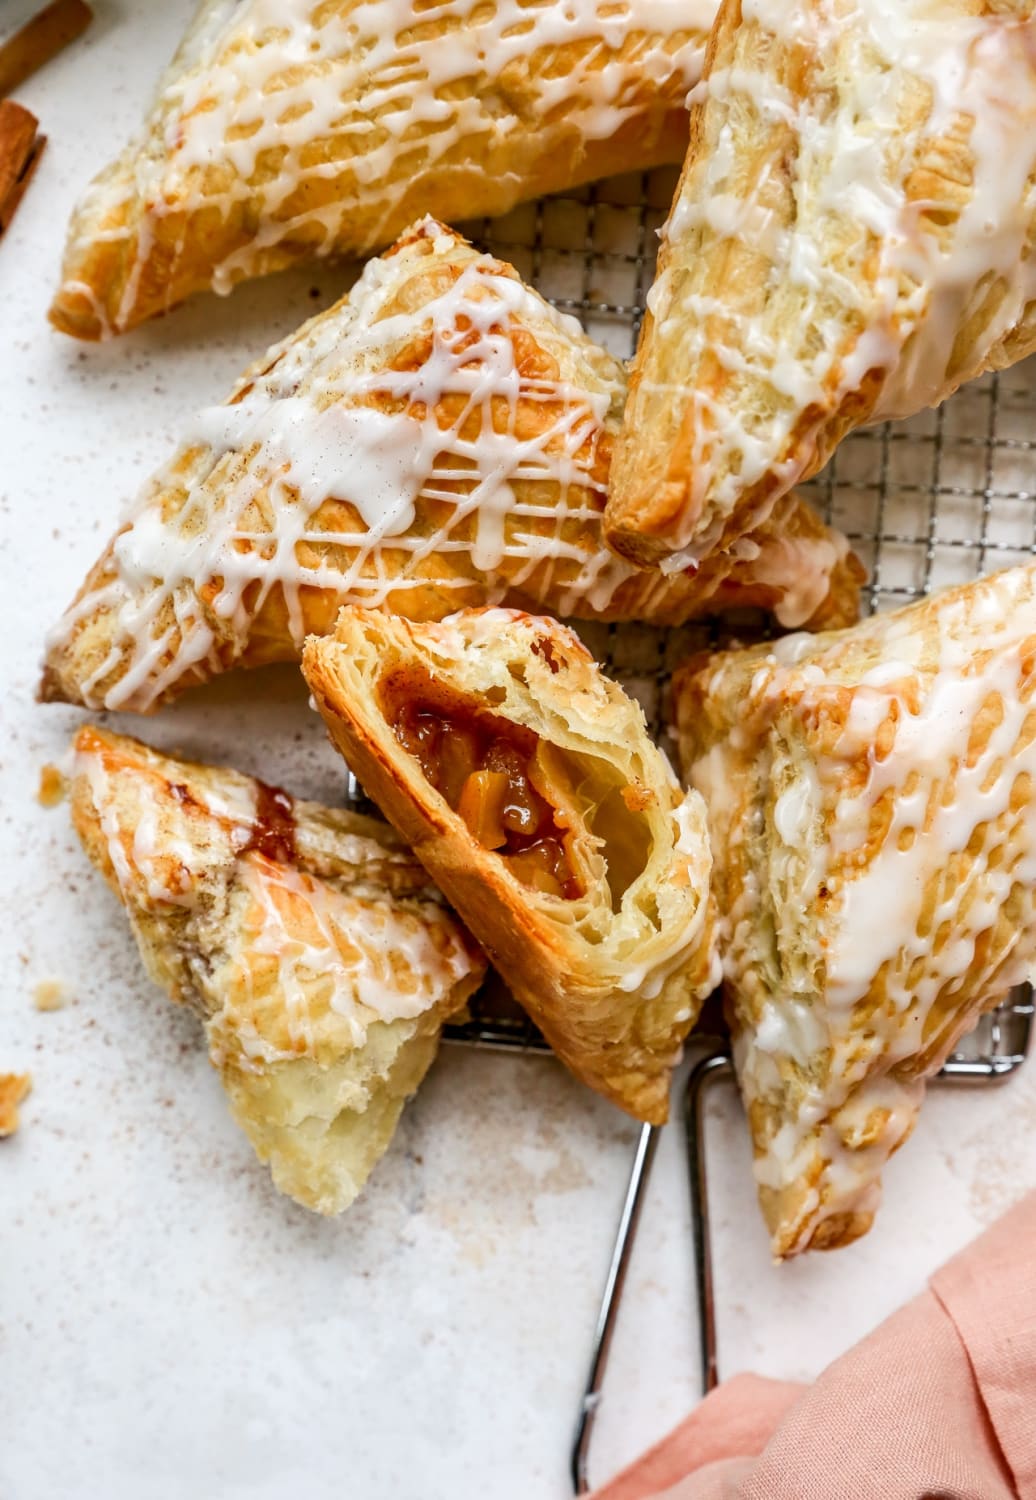 Apple turnovers make for an easy, delicious breakfast or dessert!